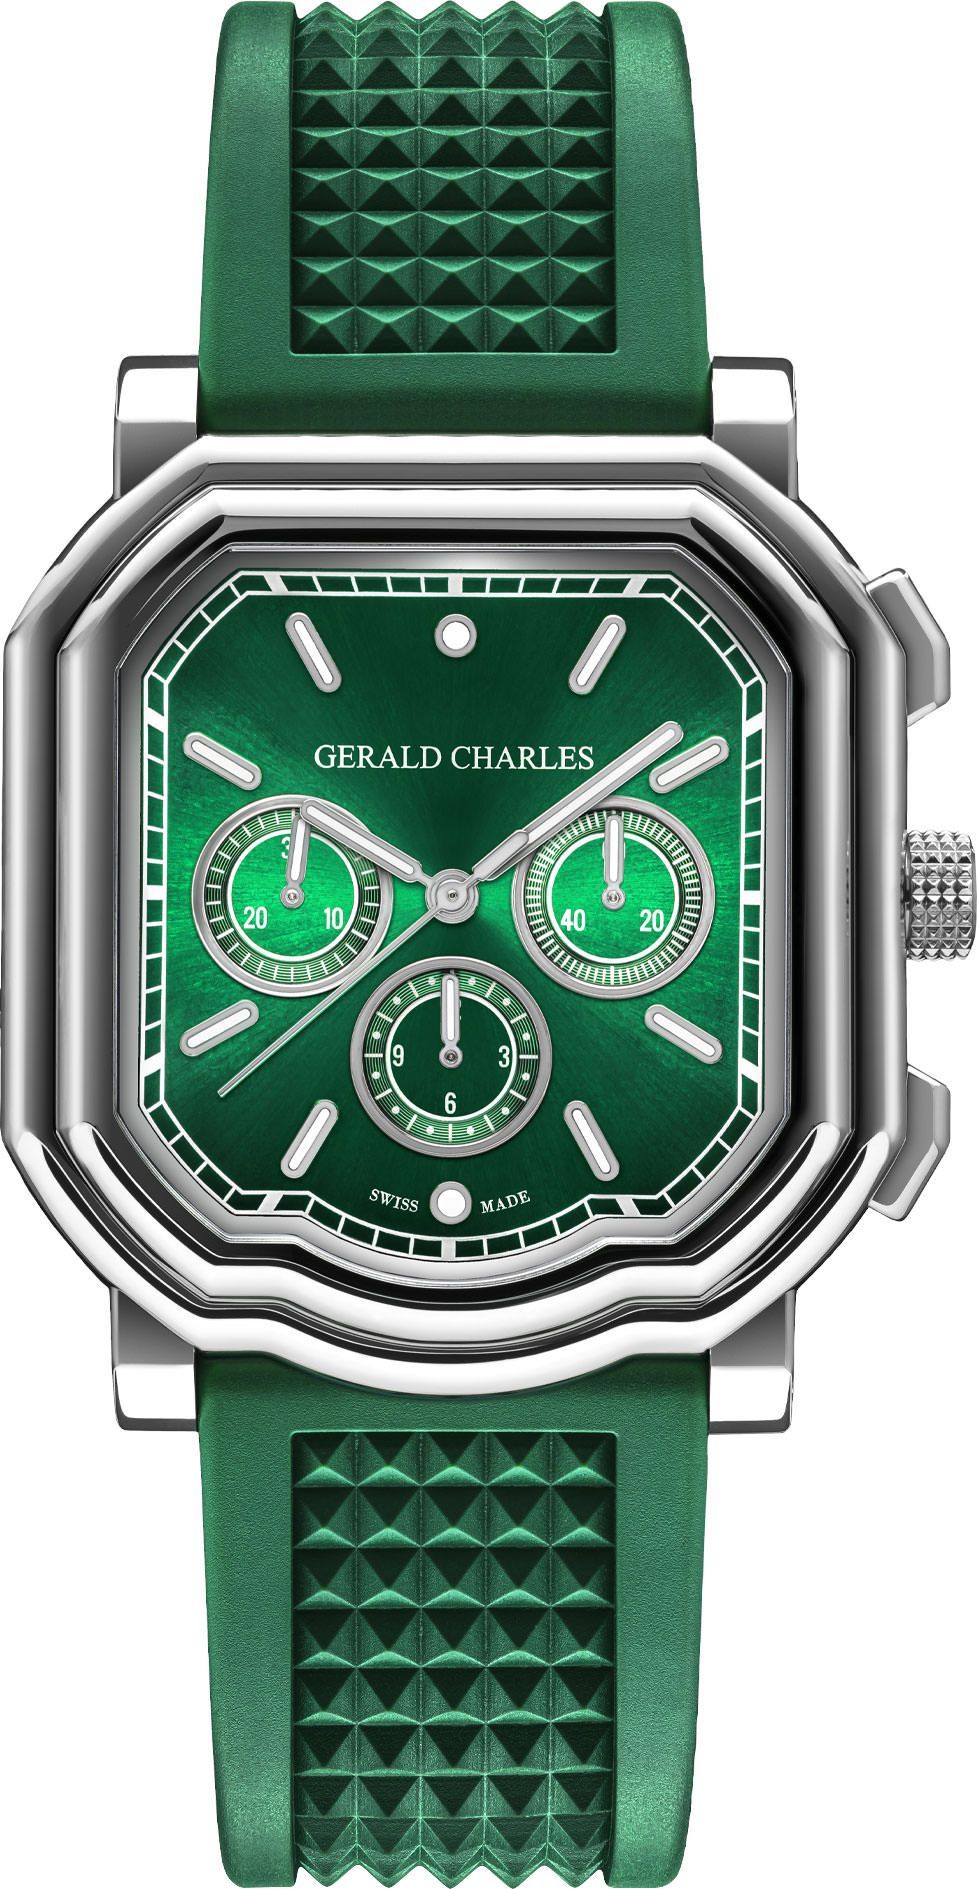 Gerald Charles Maestro Maestro 3.0 Chronograph Green Dial 41.7 mm Automatic Watch For Unisex - 1